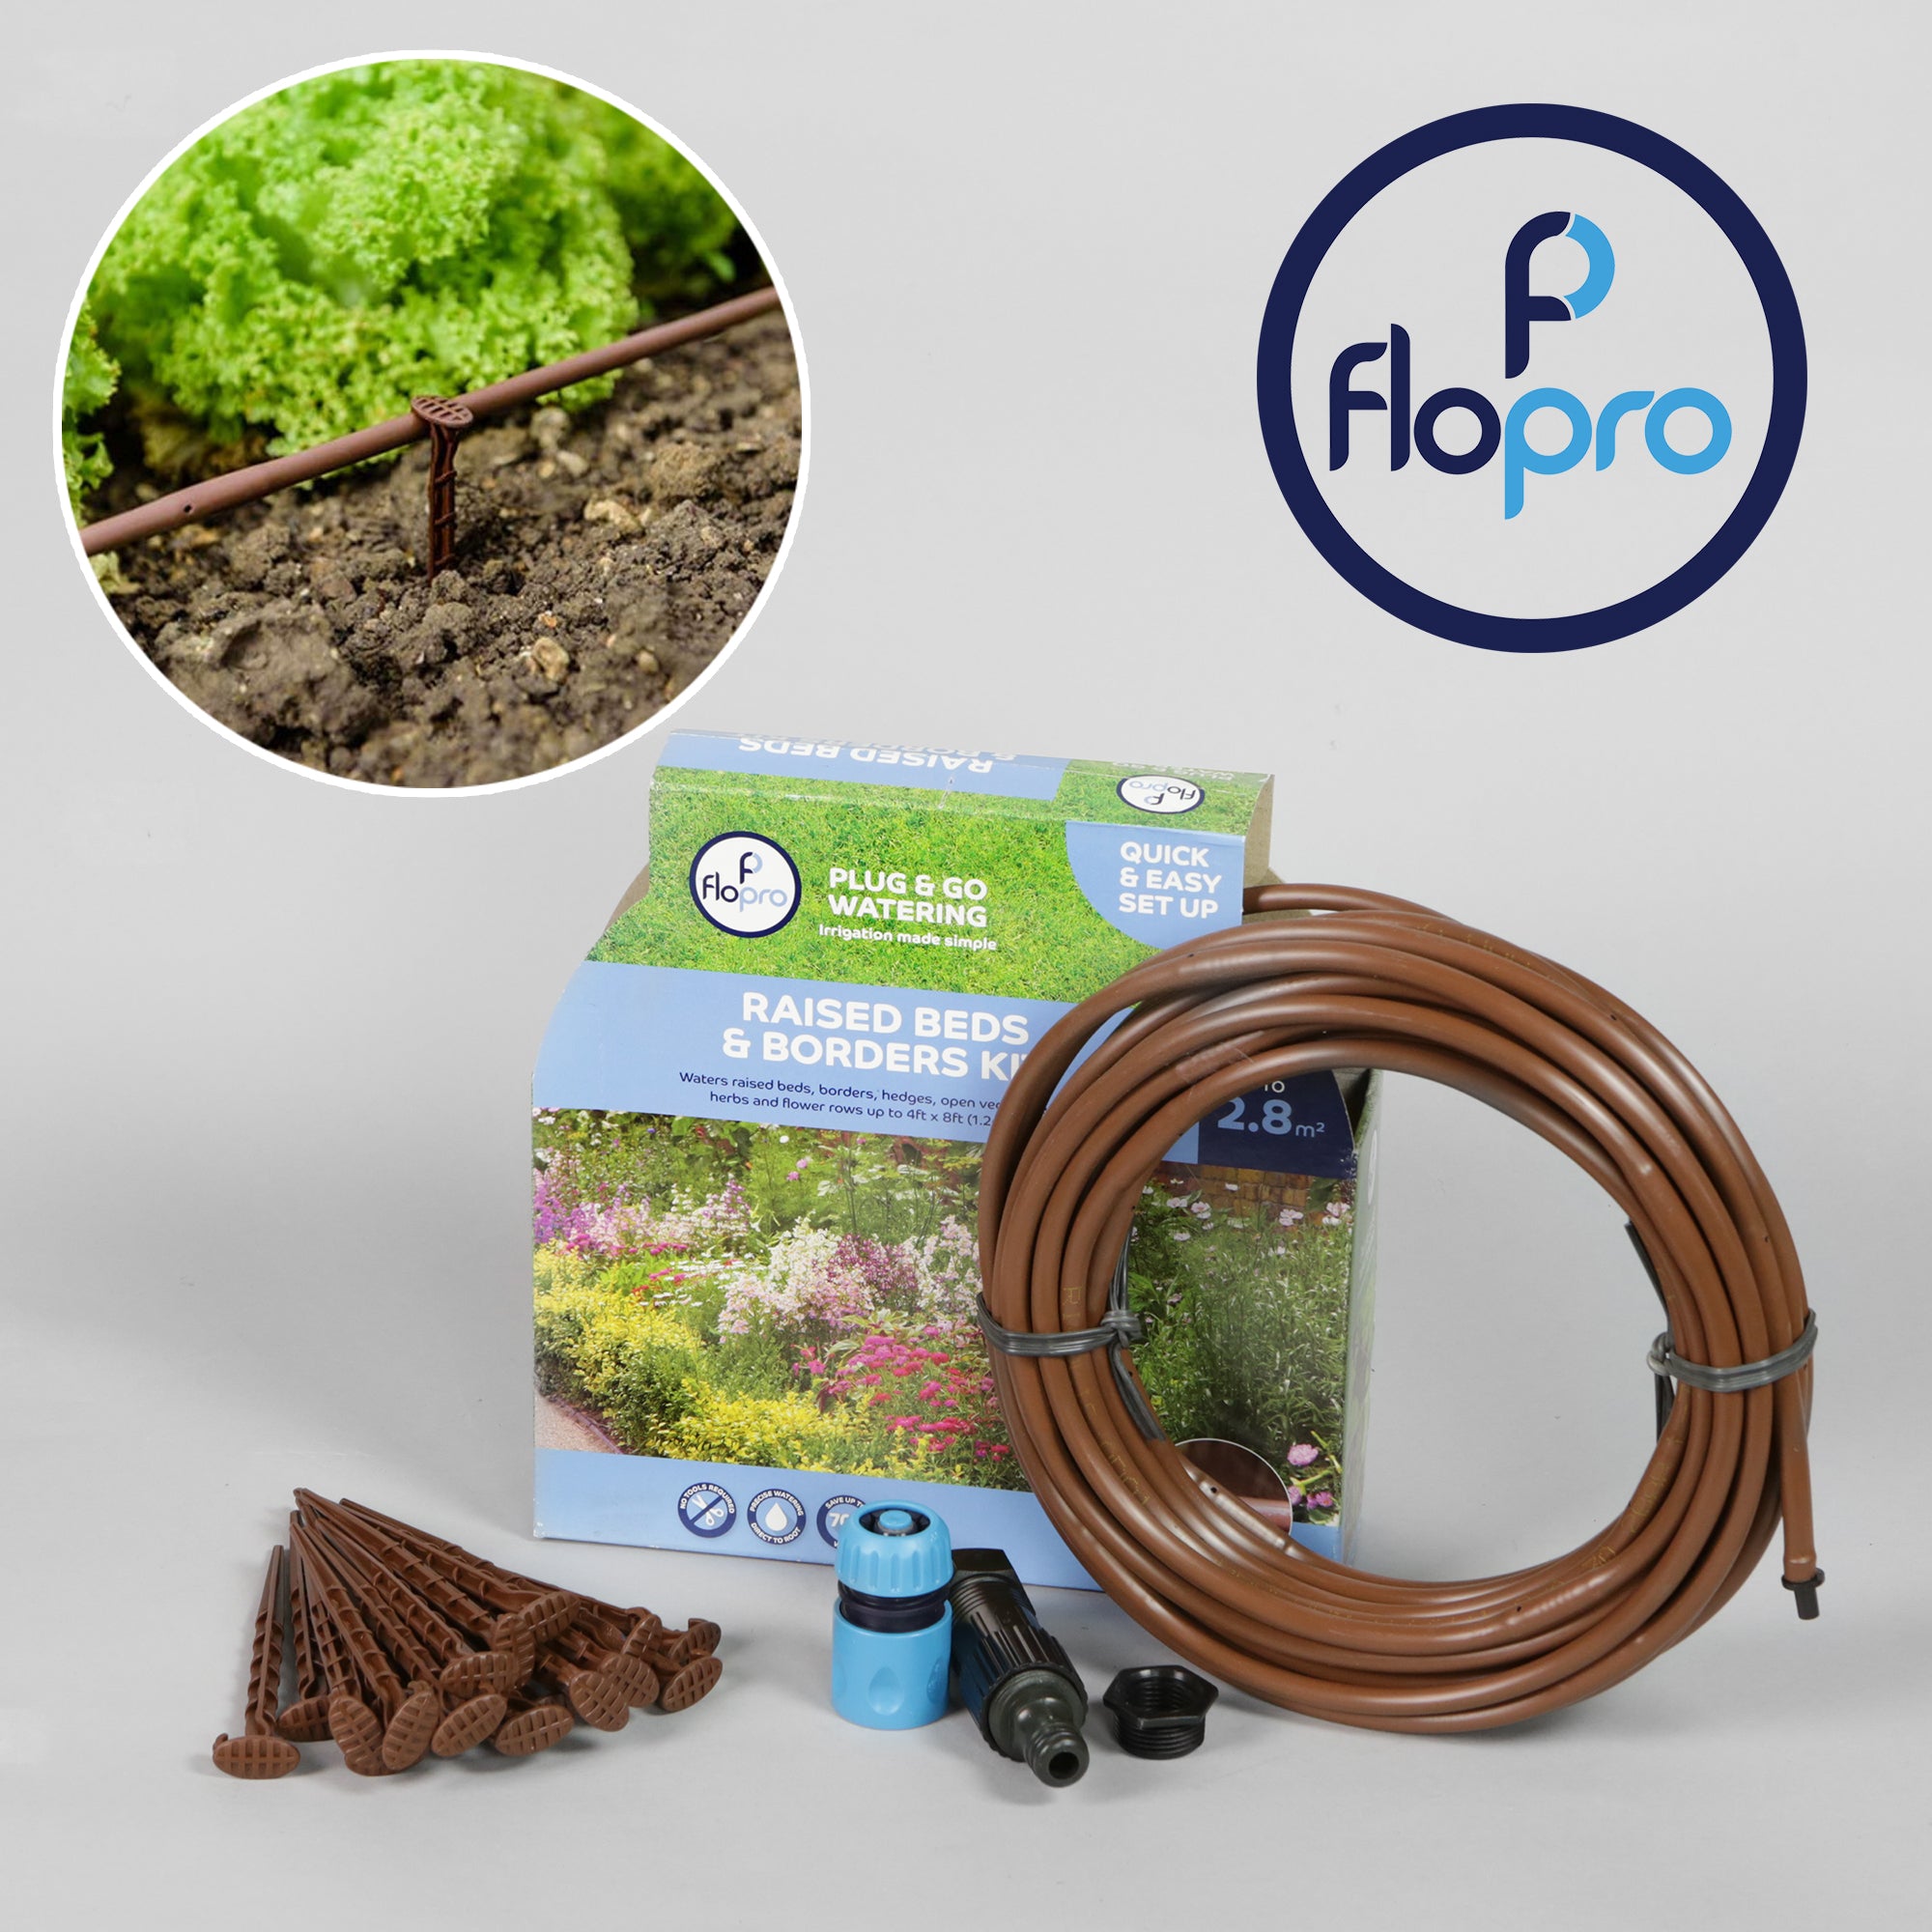 Plug & Go Watering Kit - Raised Beds & Borders by Flopro, sold by In-Excess